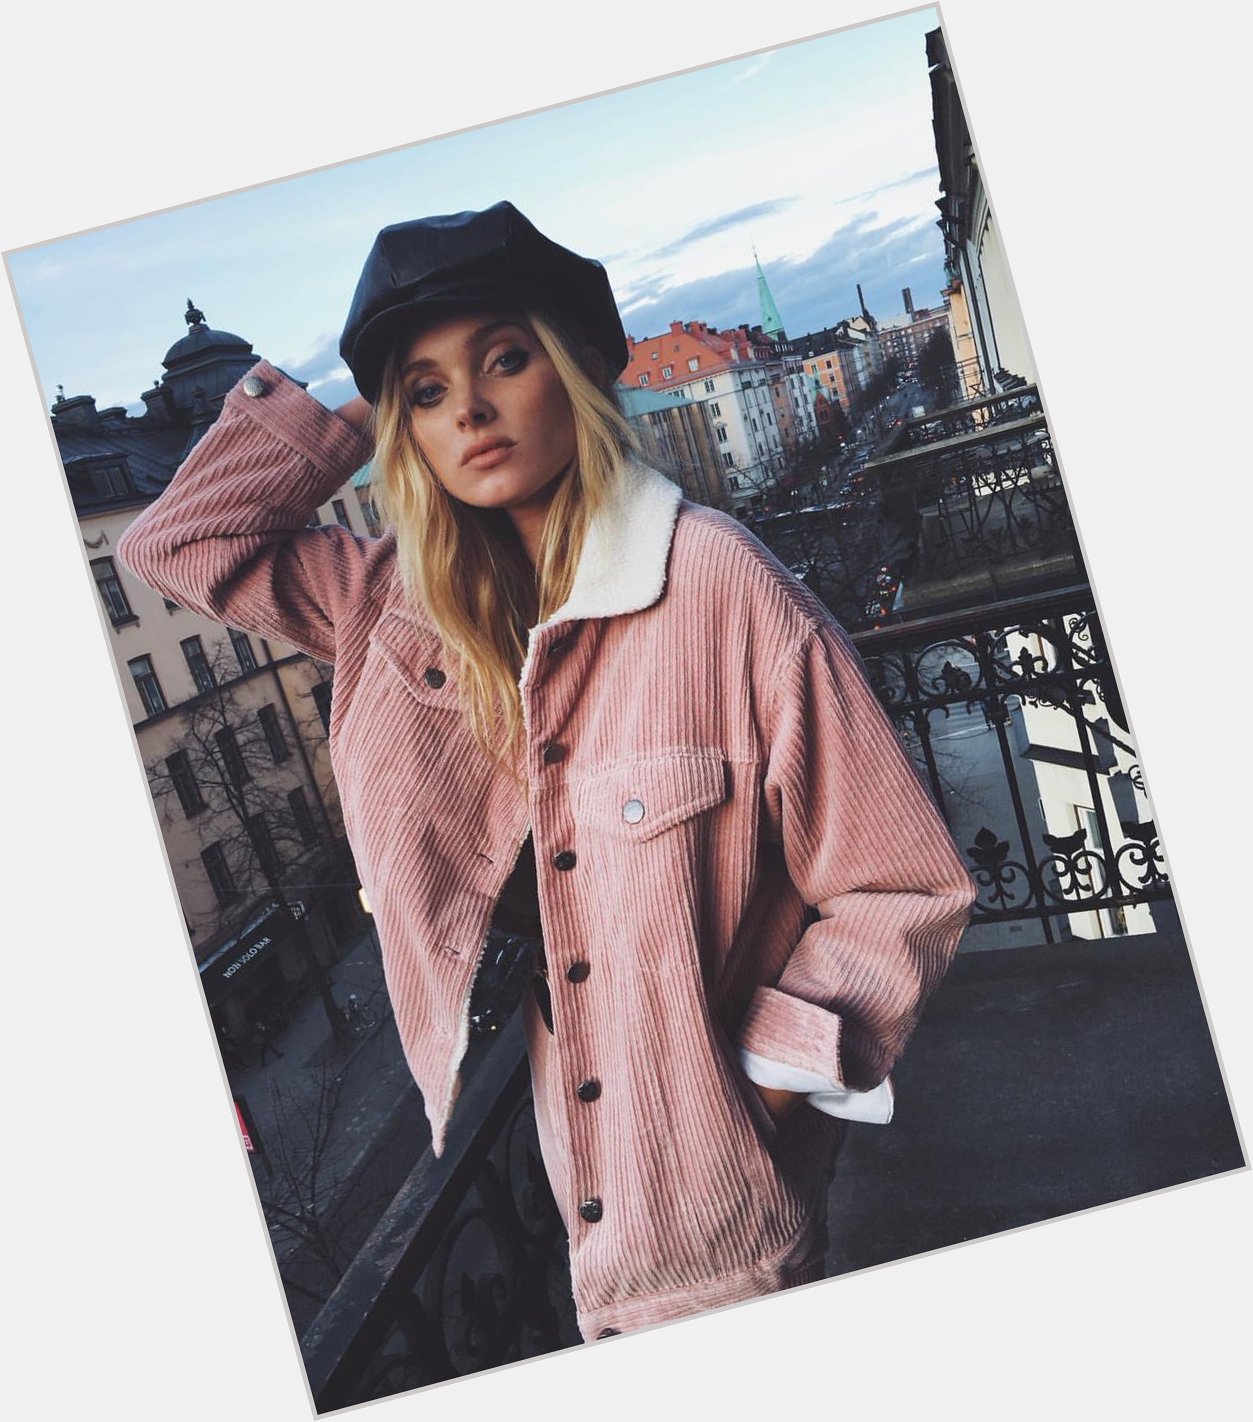 Happy birthday to the nordic queen elsa hosk, i admire her as a model and her style is amazing 